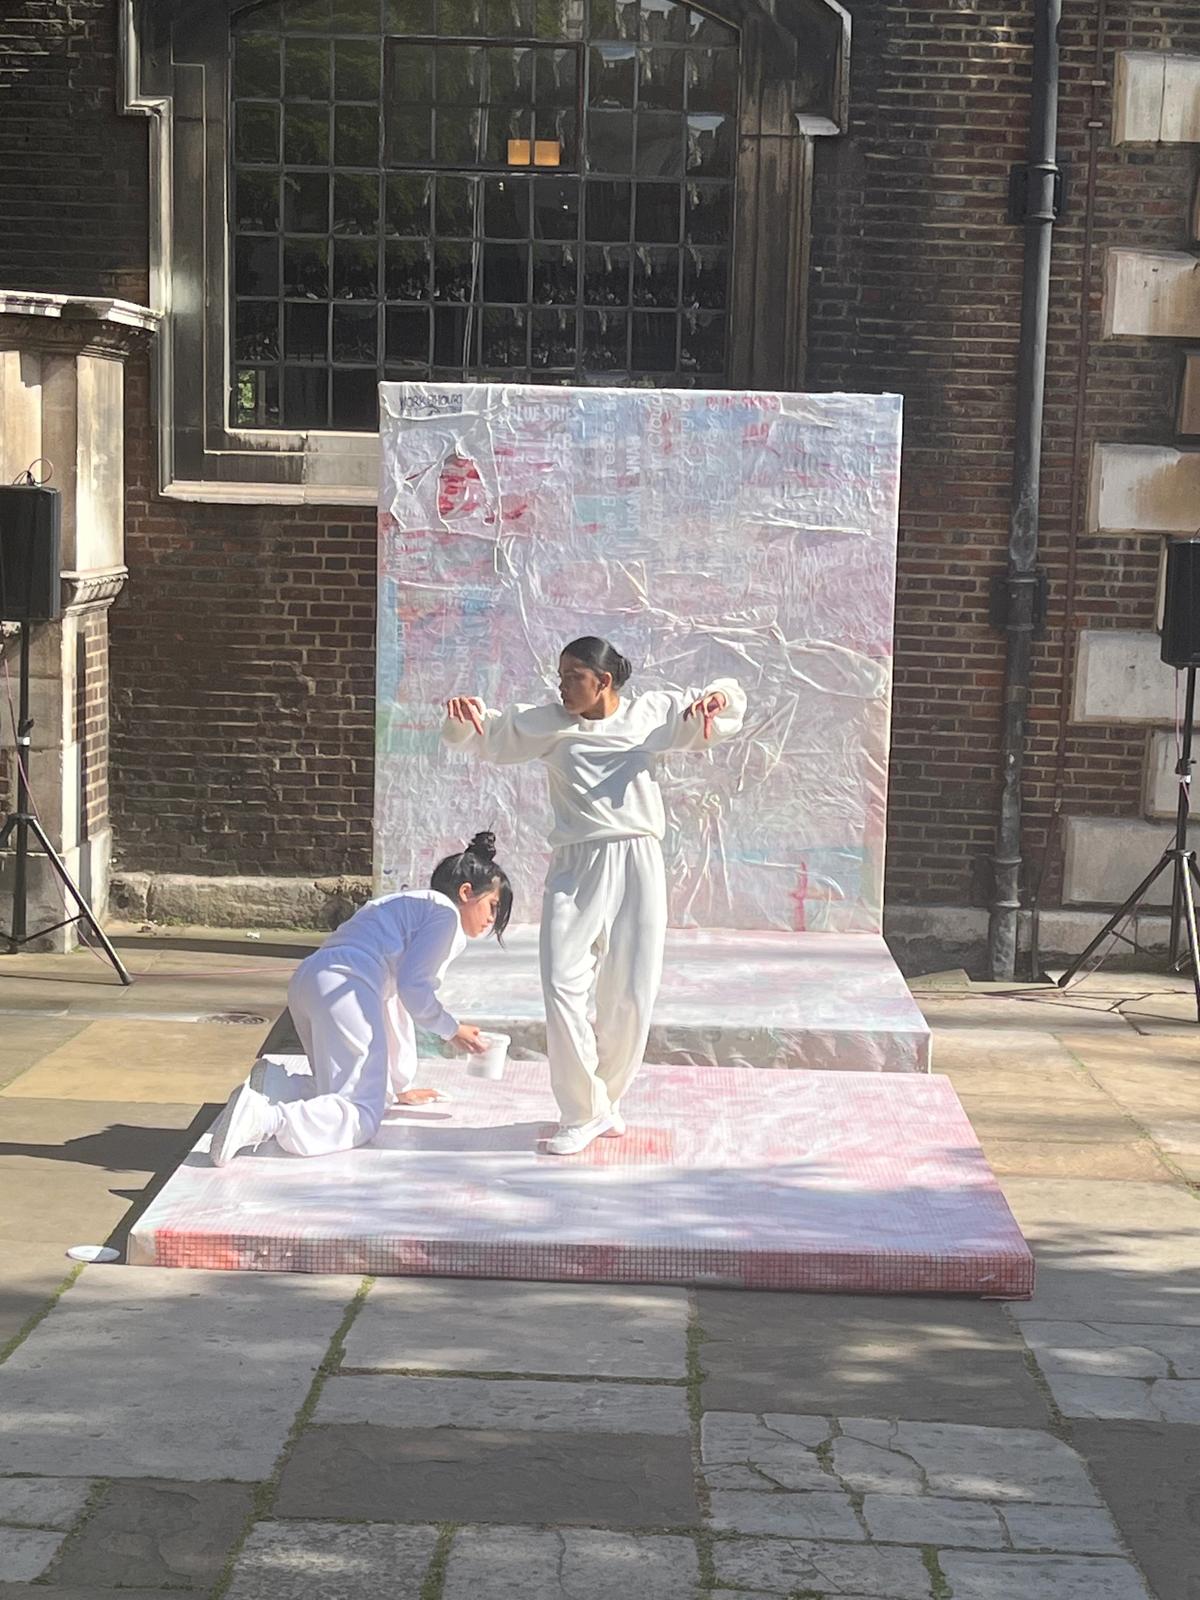 Mandy El Sayegh’s live work The Minimum in the square outside St James’s church in Piccadilly. Courtesy of Louisa Buck